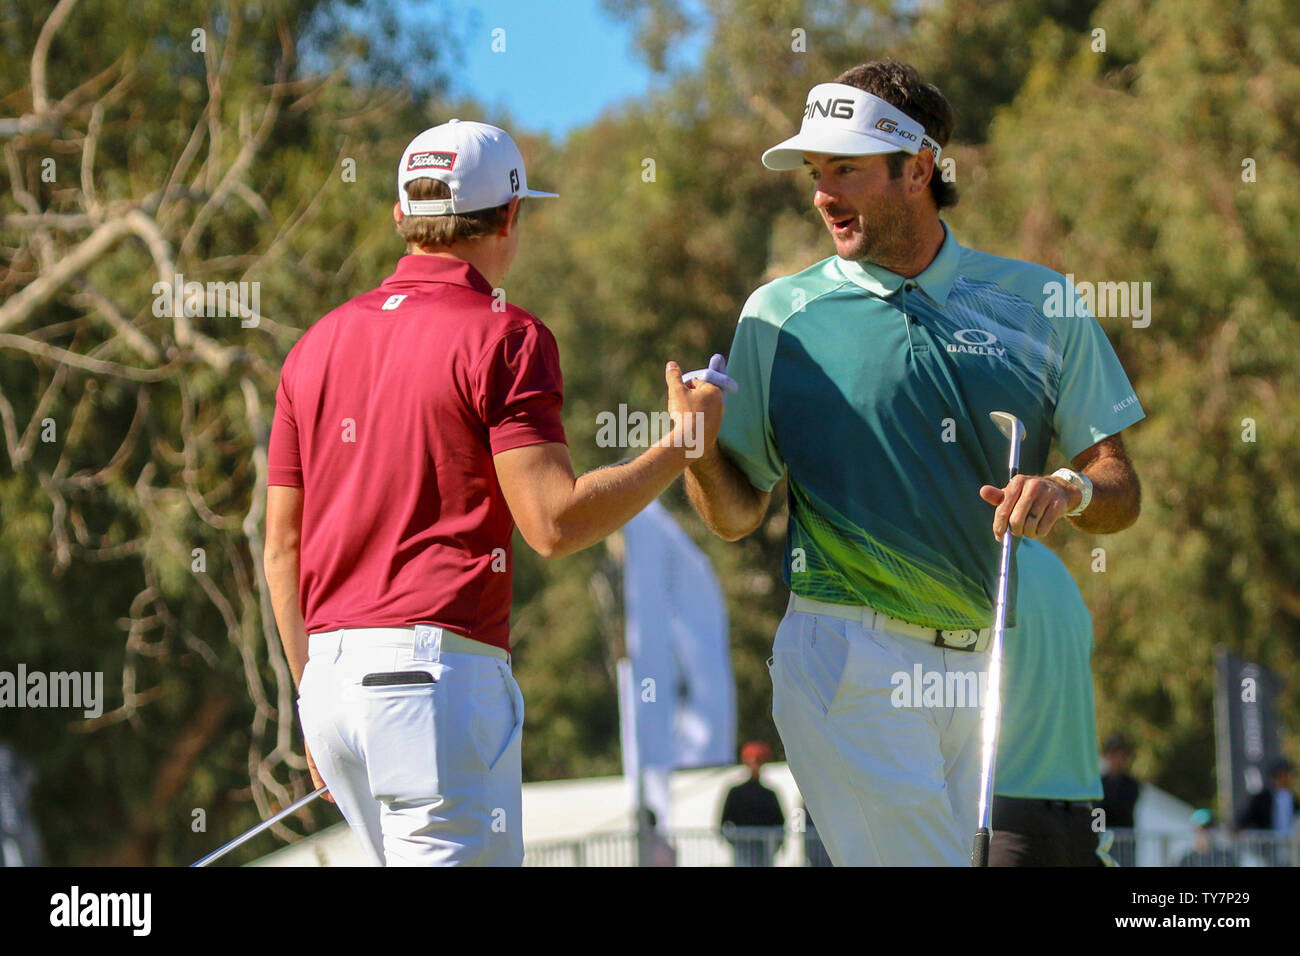 Cameron Smith congratulates Bubba Watson after his birdie on the 14th during the final round of the Genesis Open at Riviera Country Club in Los Angeles, California on February 18, 2018. Bubba Watson would win the Genesis Open Championship with a score of -12. Photo by Howard Shen/UPI Stock Photo